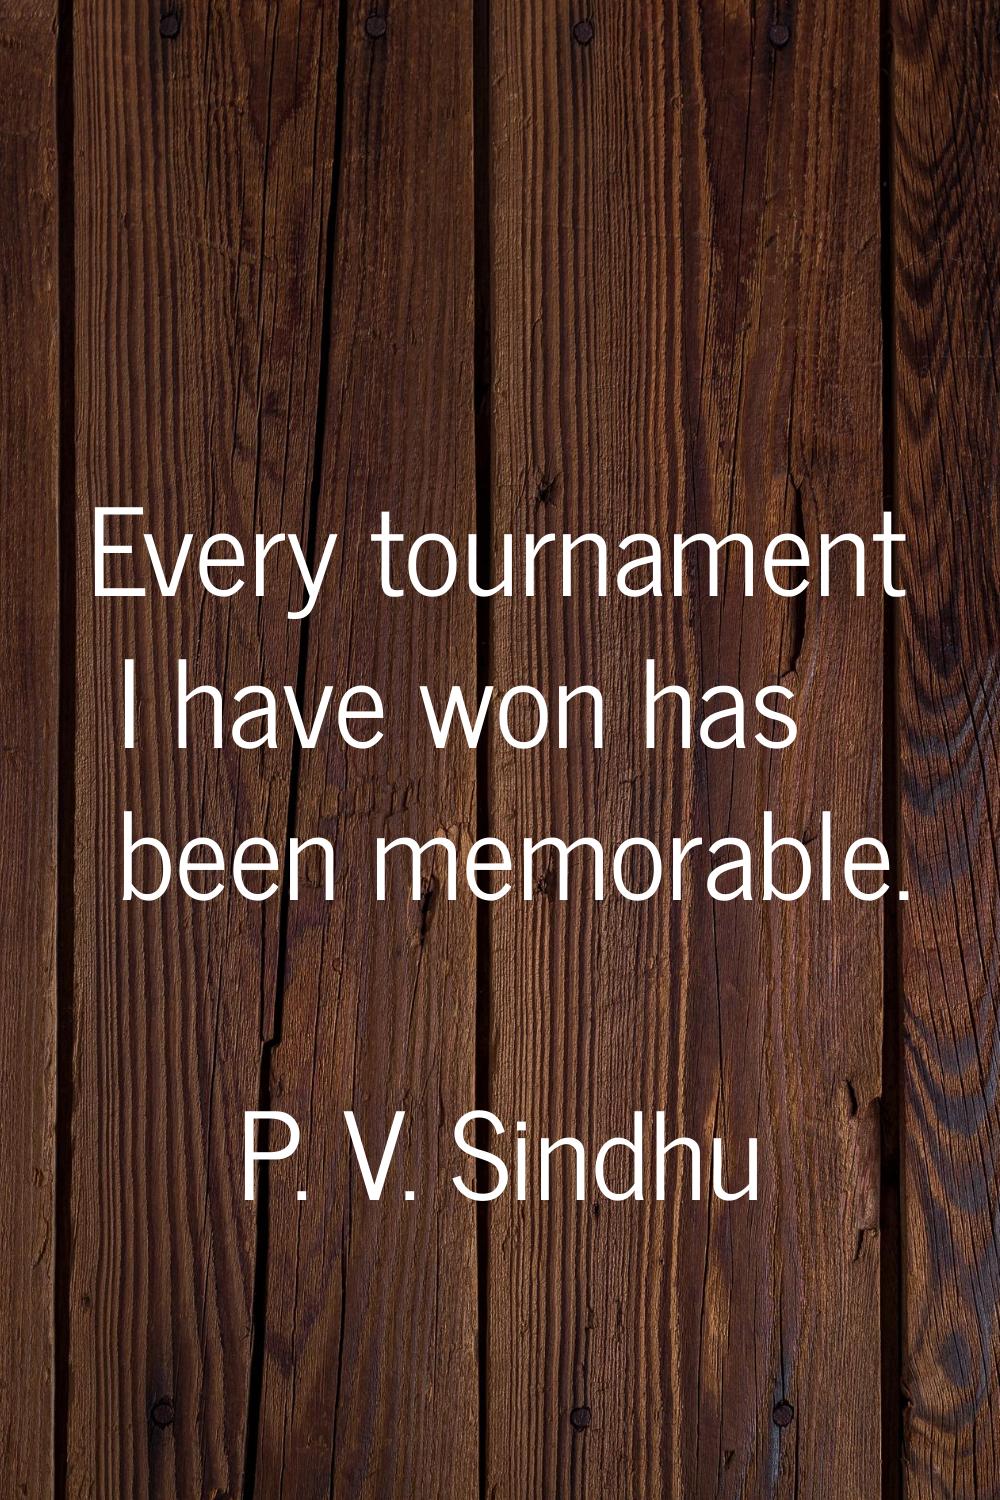 Every tournament I have won has been memorable.